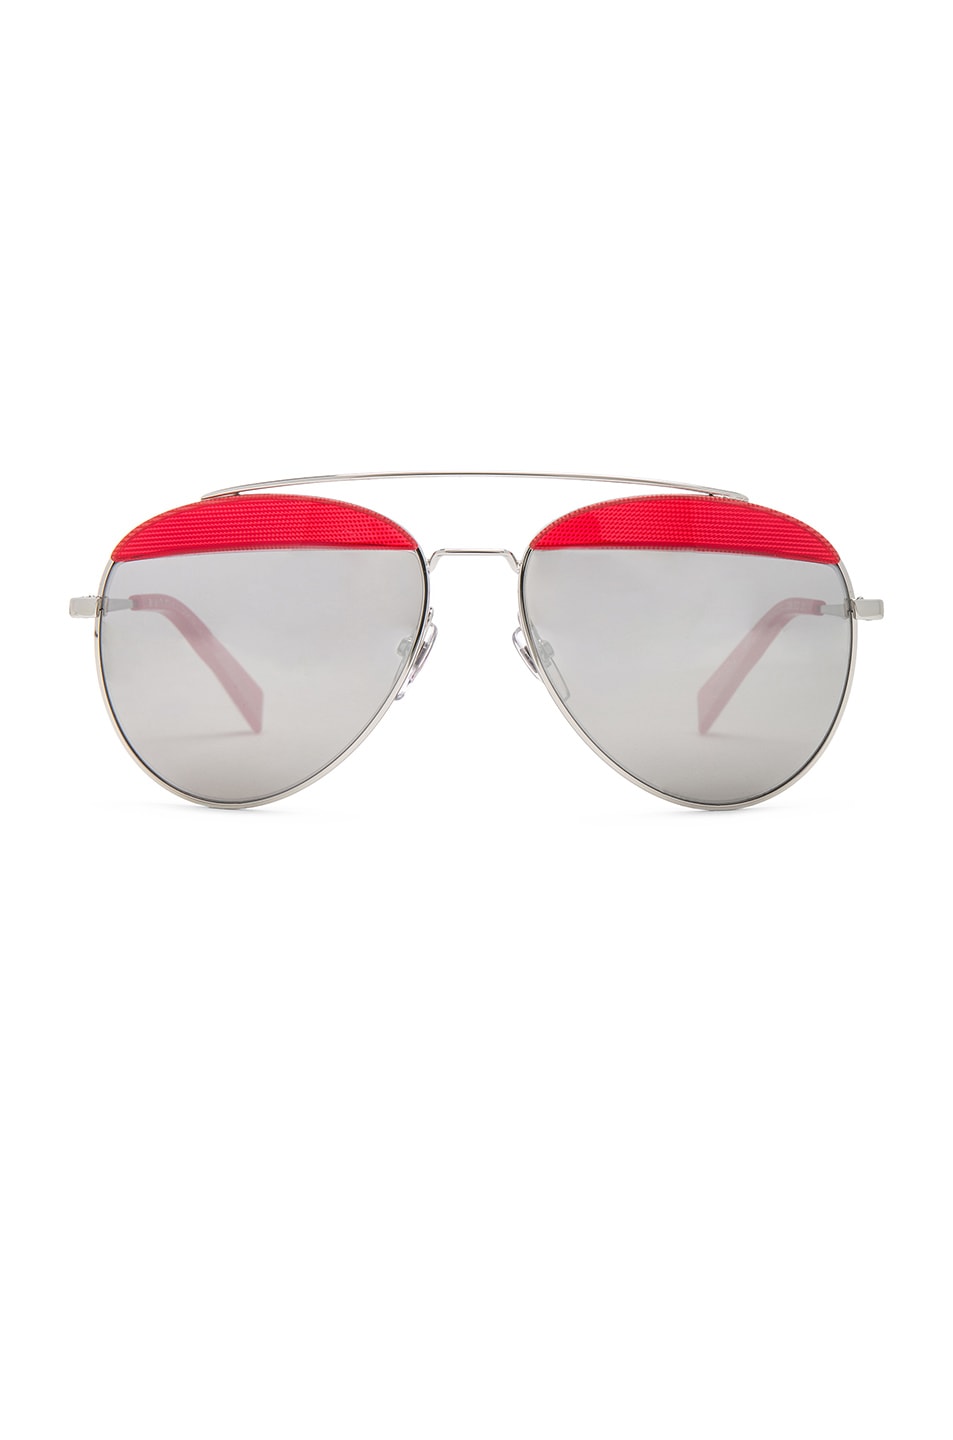 Image 1 of Oliver Peoples x Alain Mikli Aviator Sunglasses in Red & Silver Mirror